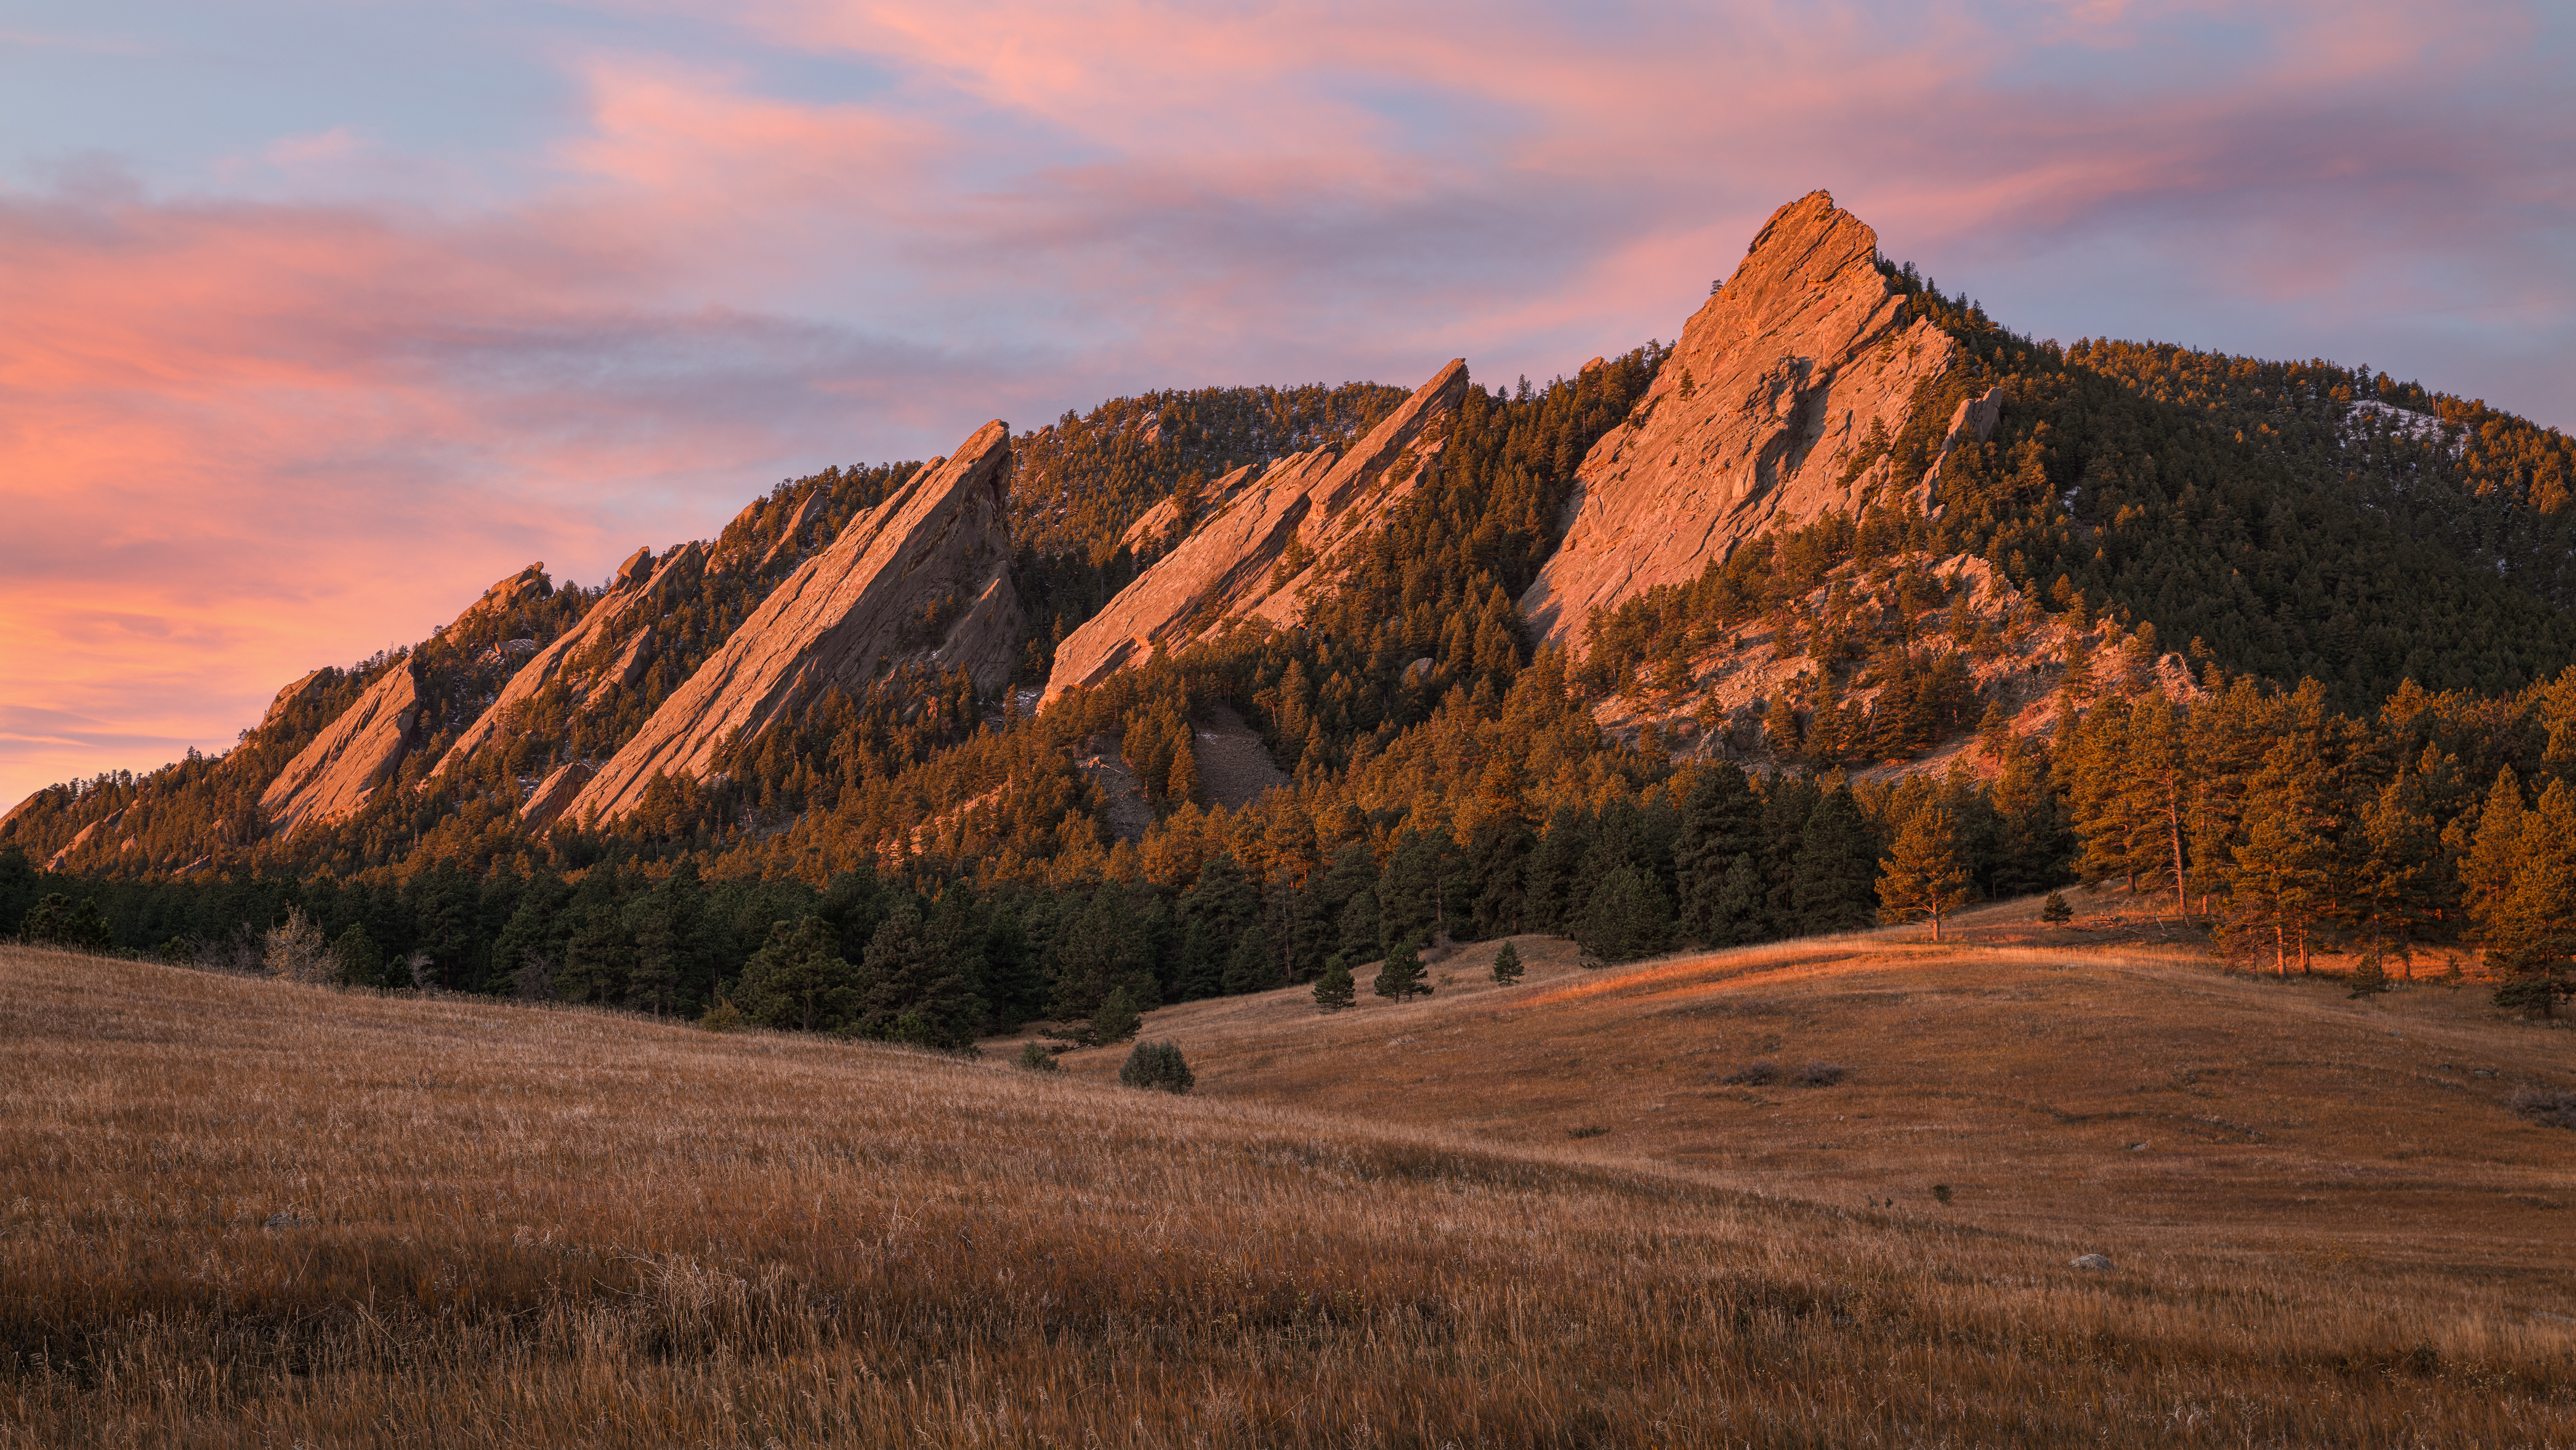 General 4183x2355 landscape sunrise Colorado Flatirons nature field forest USA mountains trees